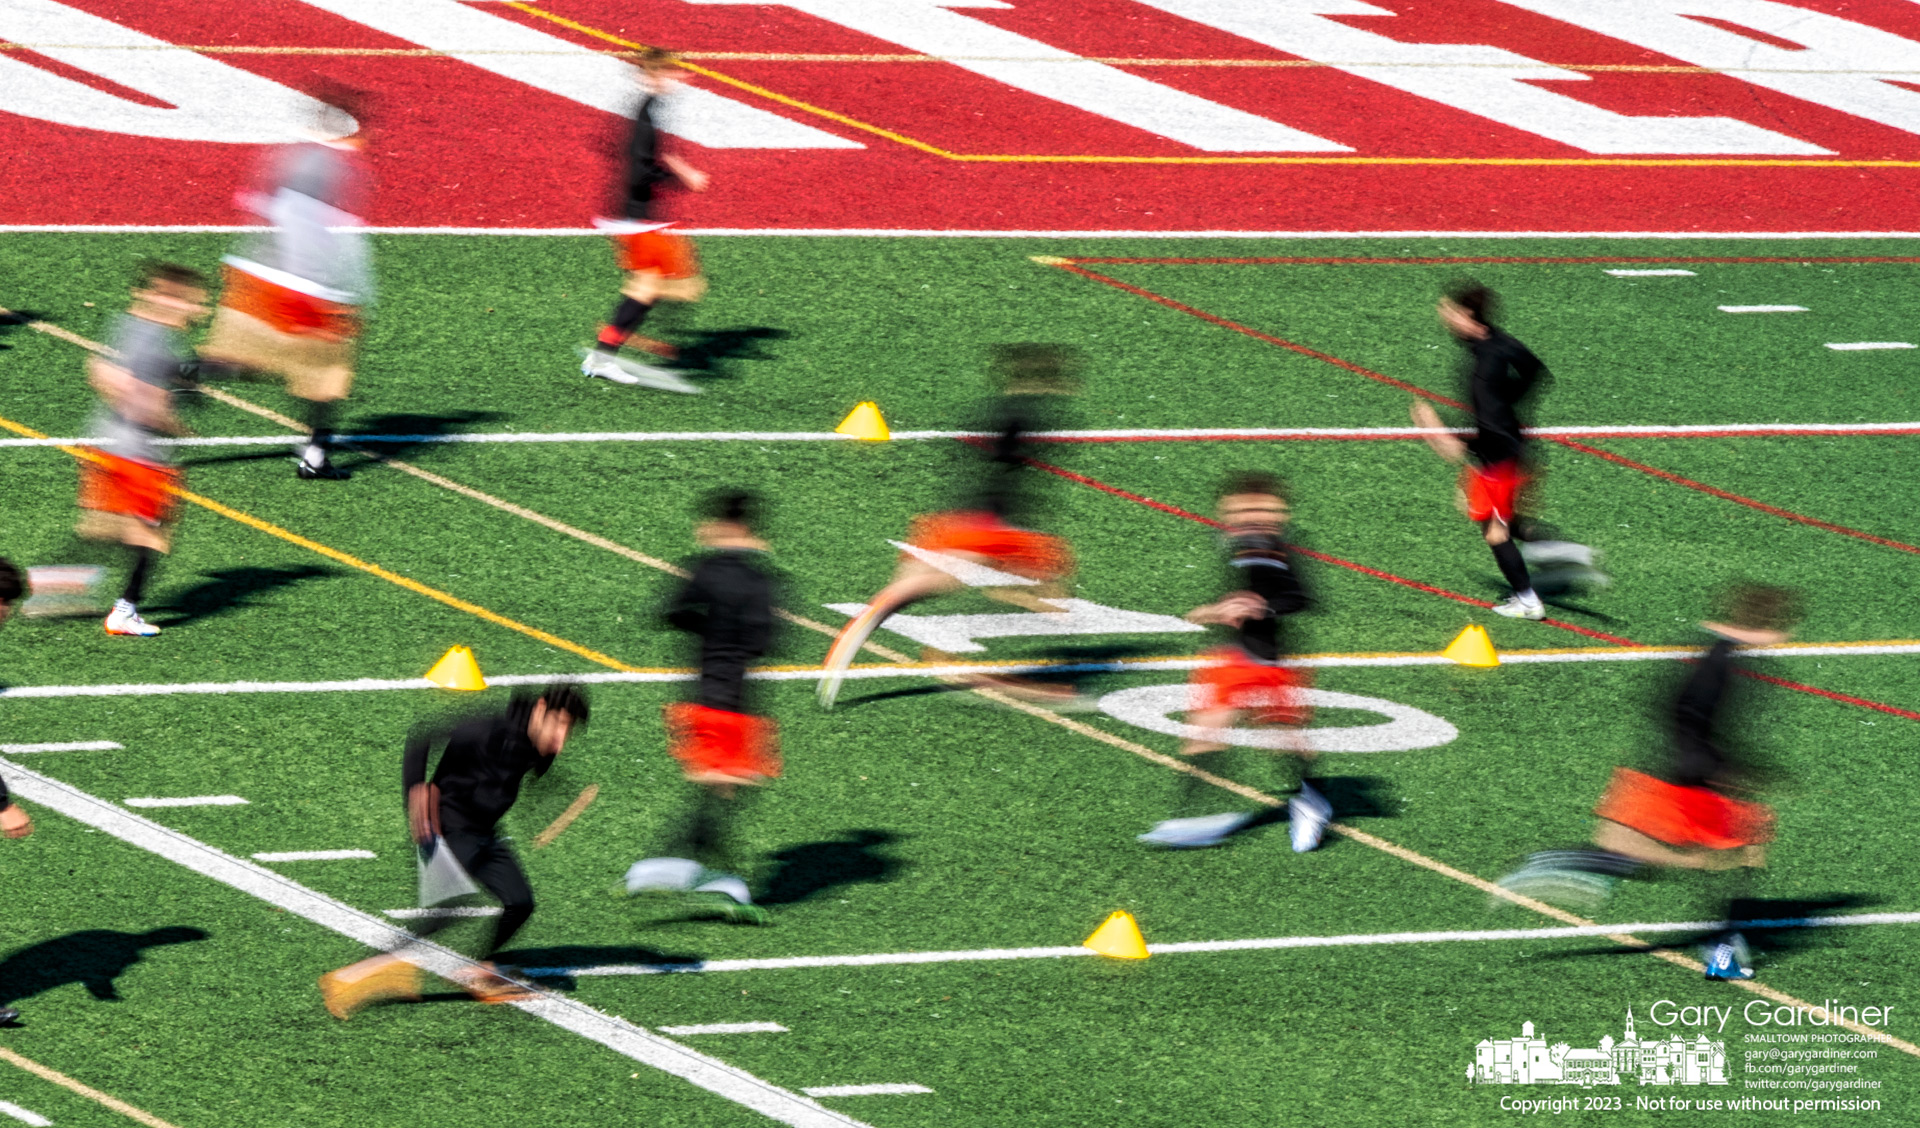 The Otterbein soccer team is a blur as they run through drills at the start of practice with temperatures near freezing. My Final Photo for March 19, 2023.